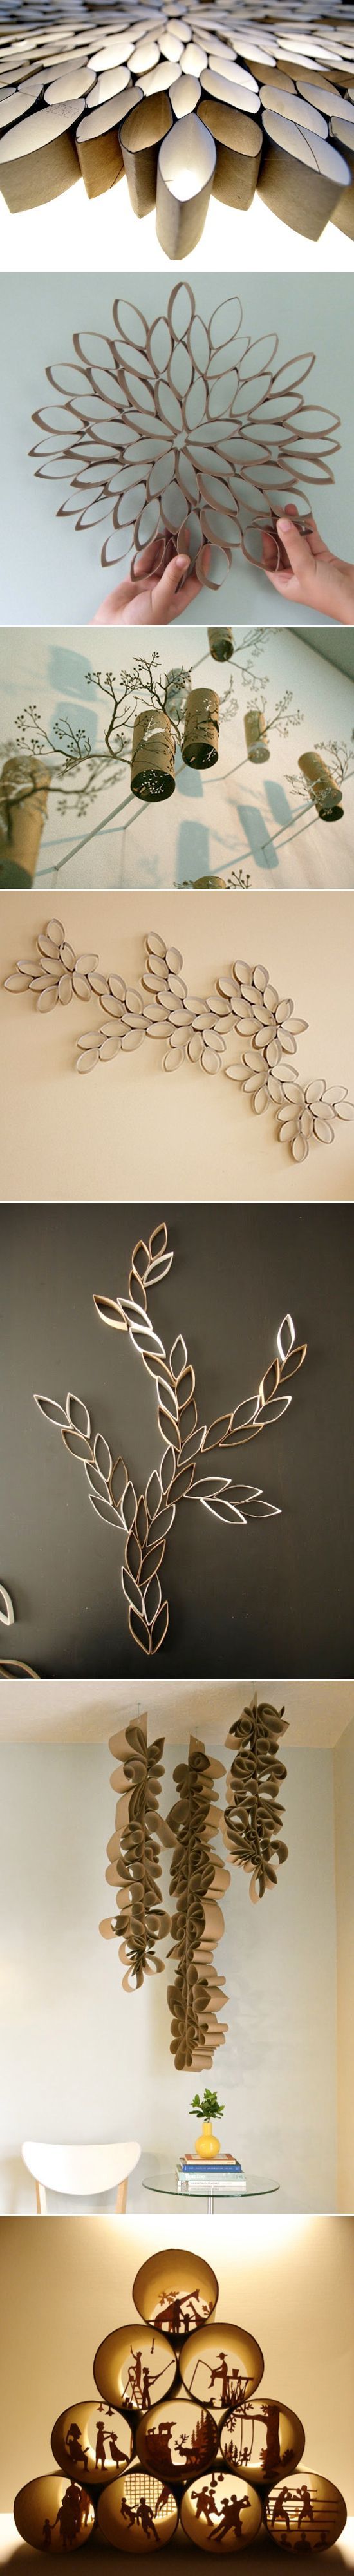 Toilet Paper Roll Crafts–I